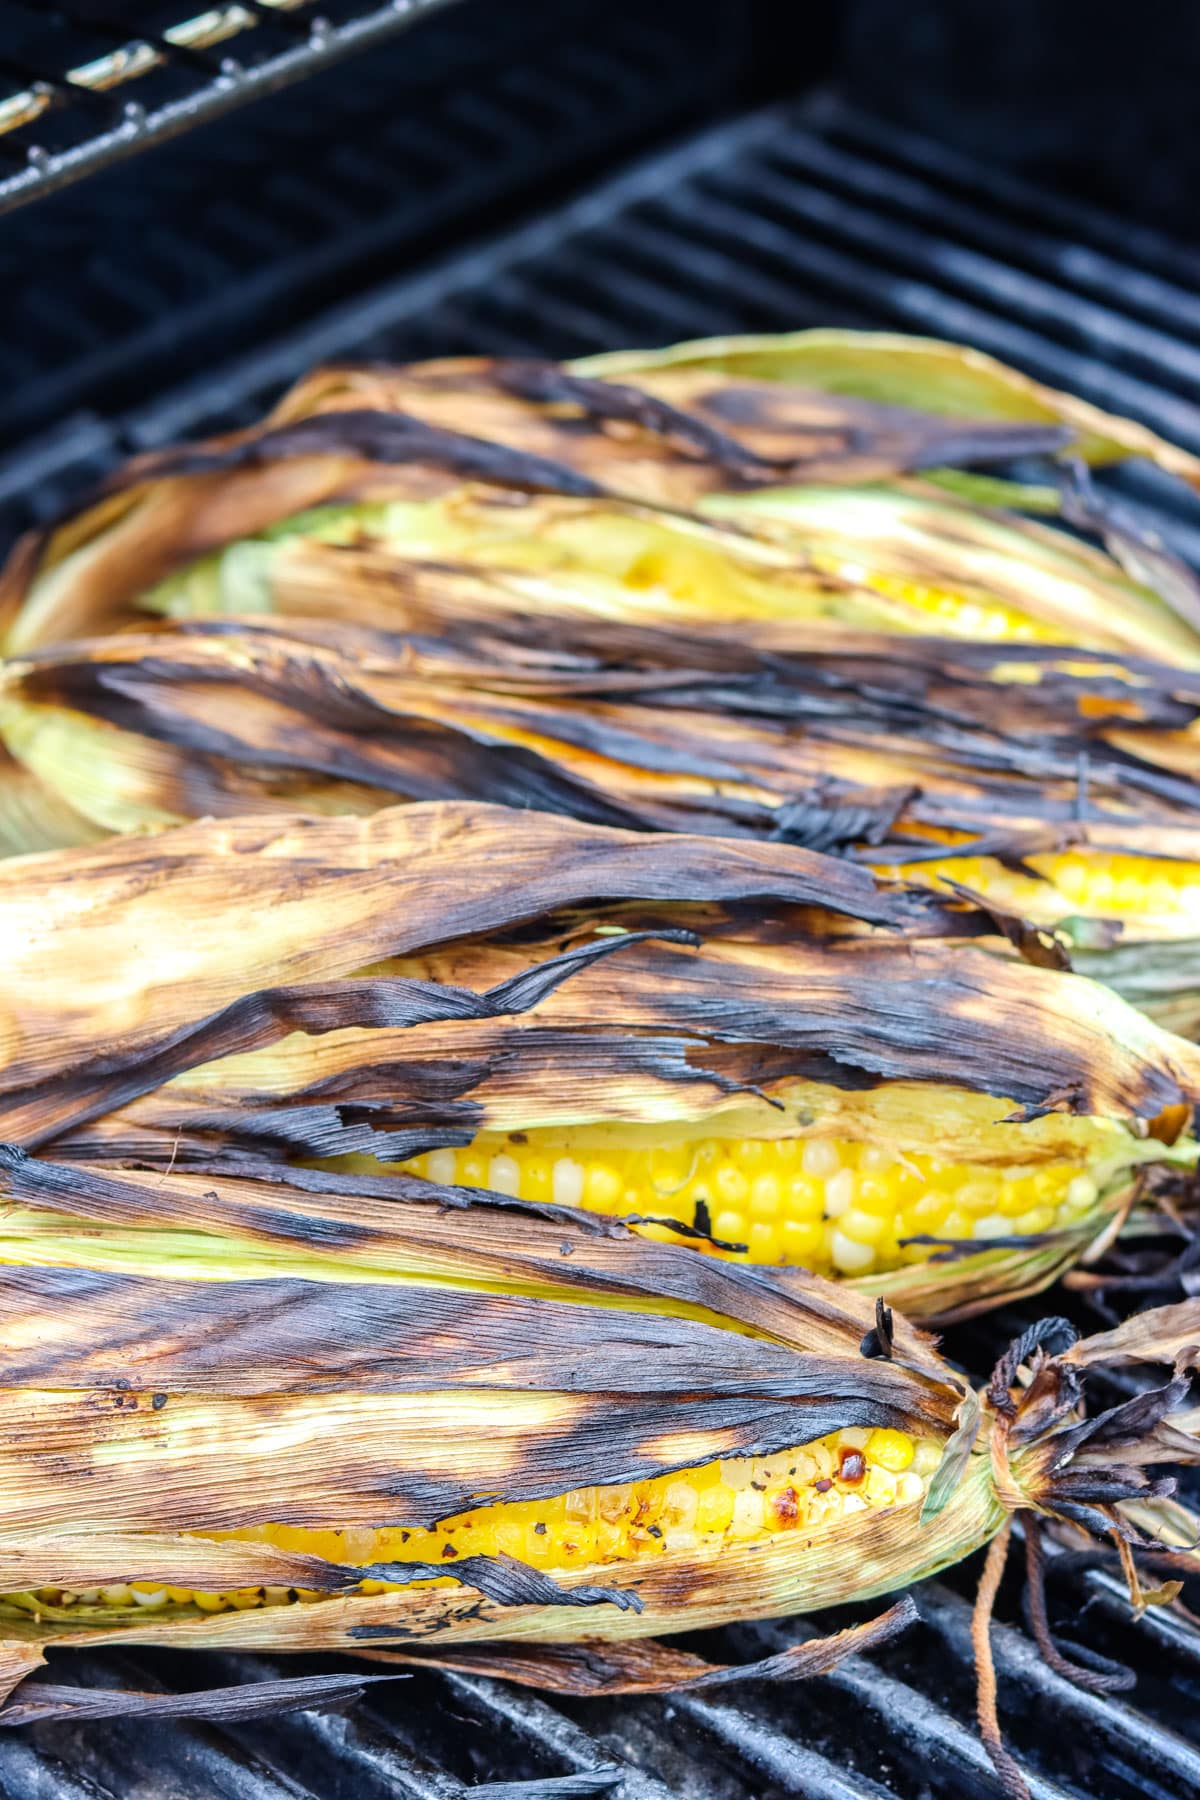 The finished Grilled Corn In Husk on a grill.